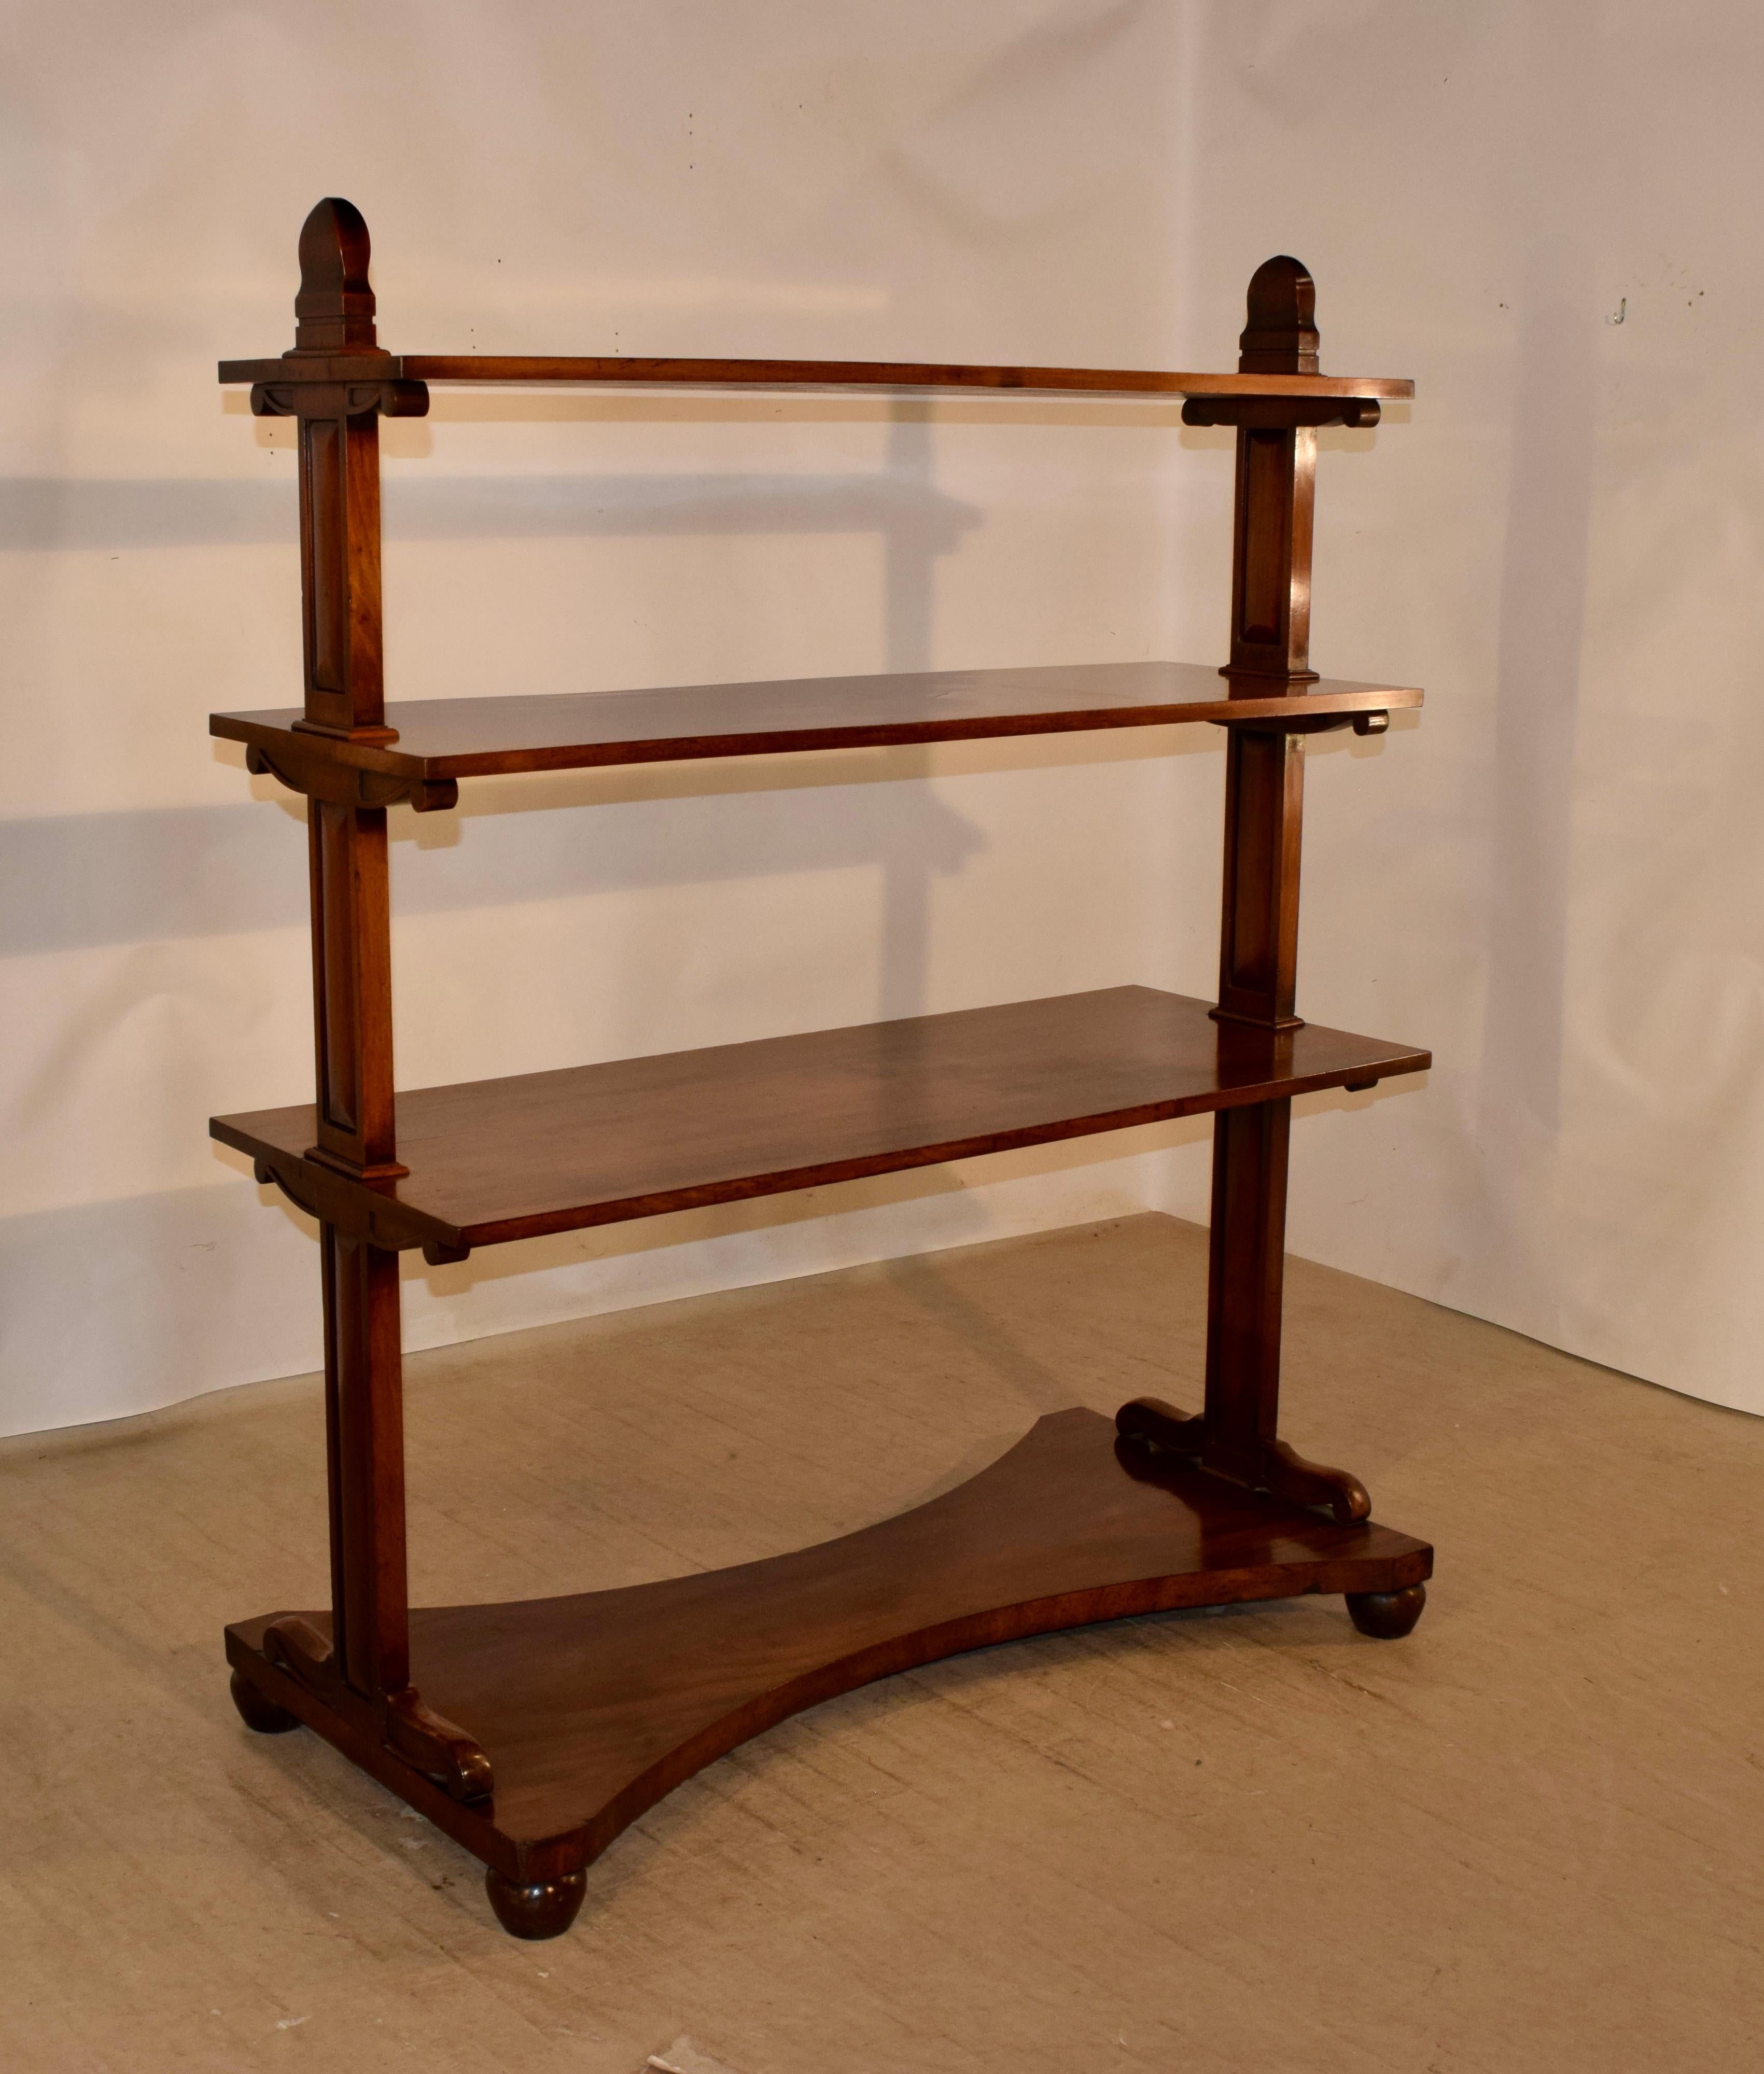 19th century English dessert buffet made from mahogany. It has three shelves, all supported by central columns with brackets. The base is shaped and is raised on hand-turned feet.